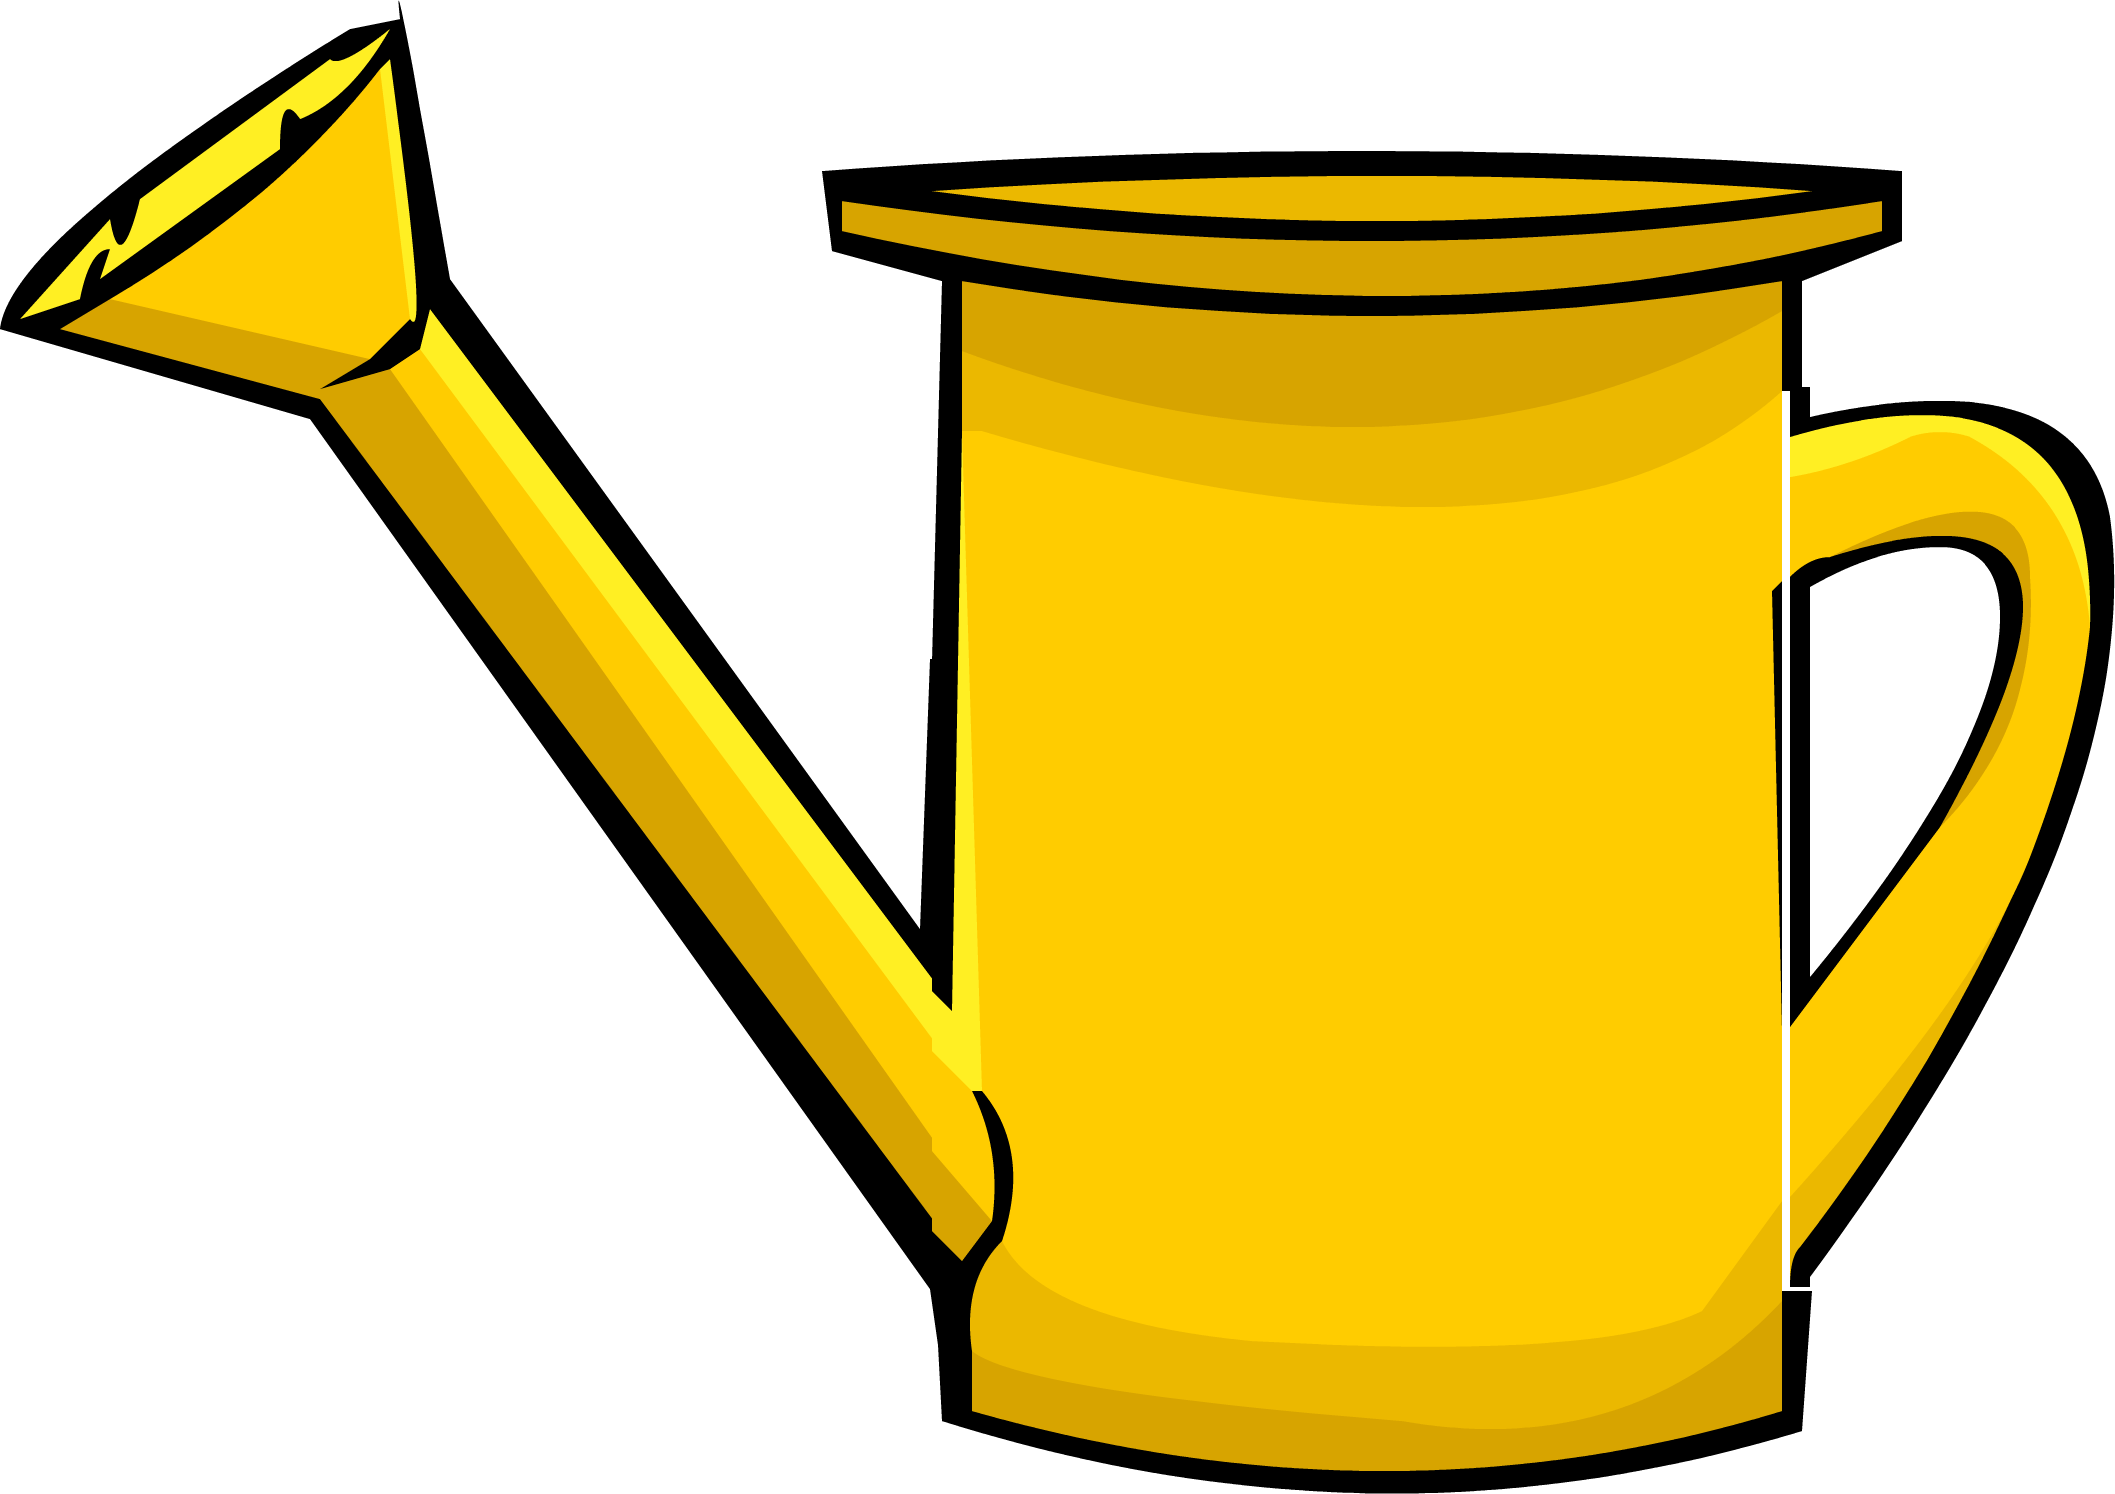 Image - Watering Can.PNG | Club Penguin Wiki | Fandom powered by Wikia